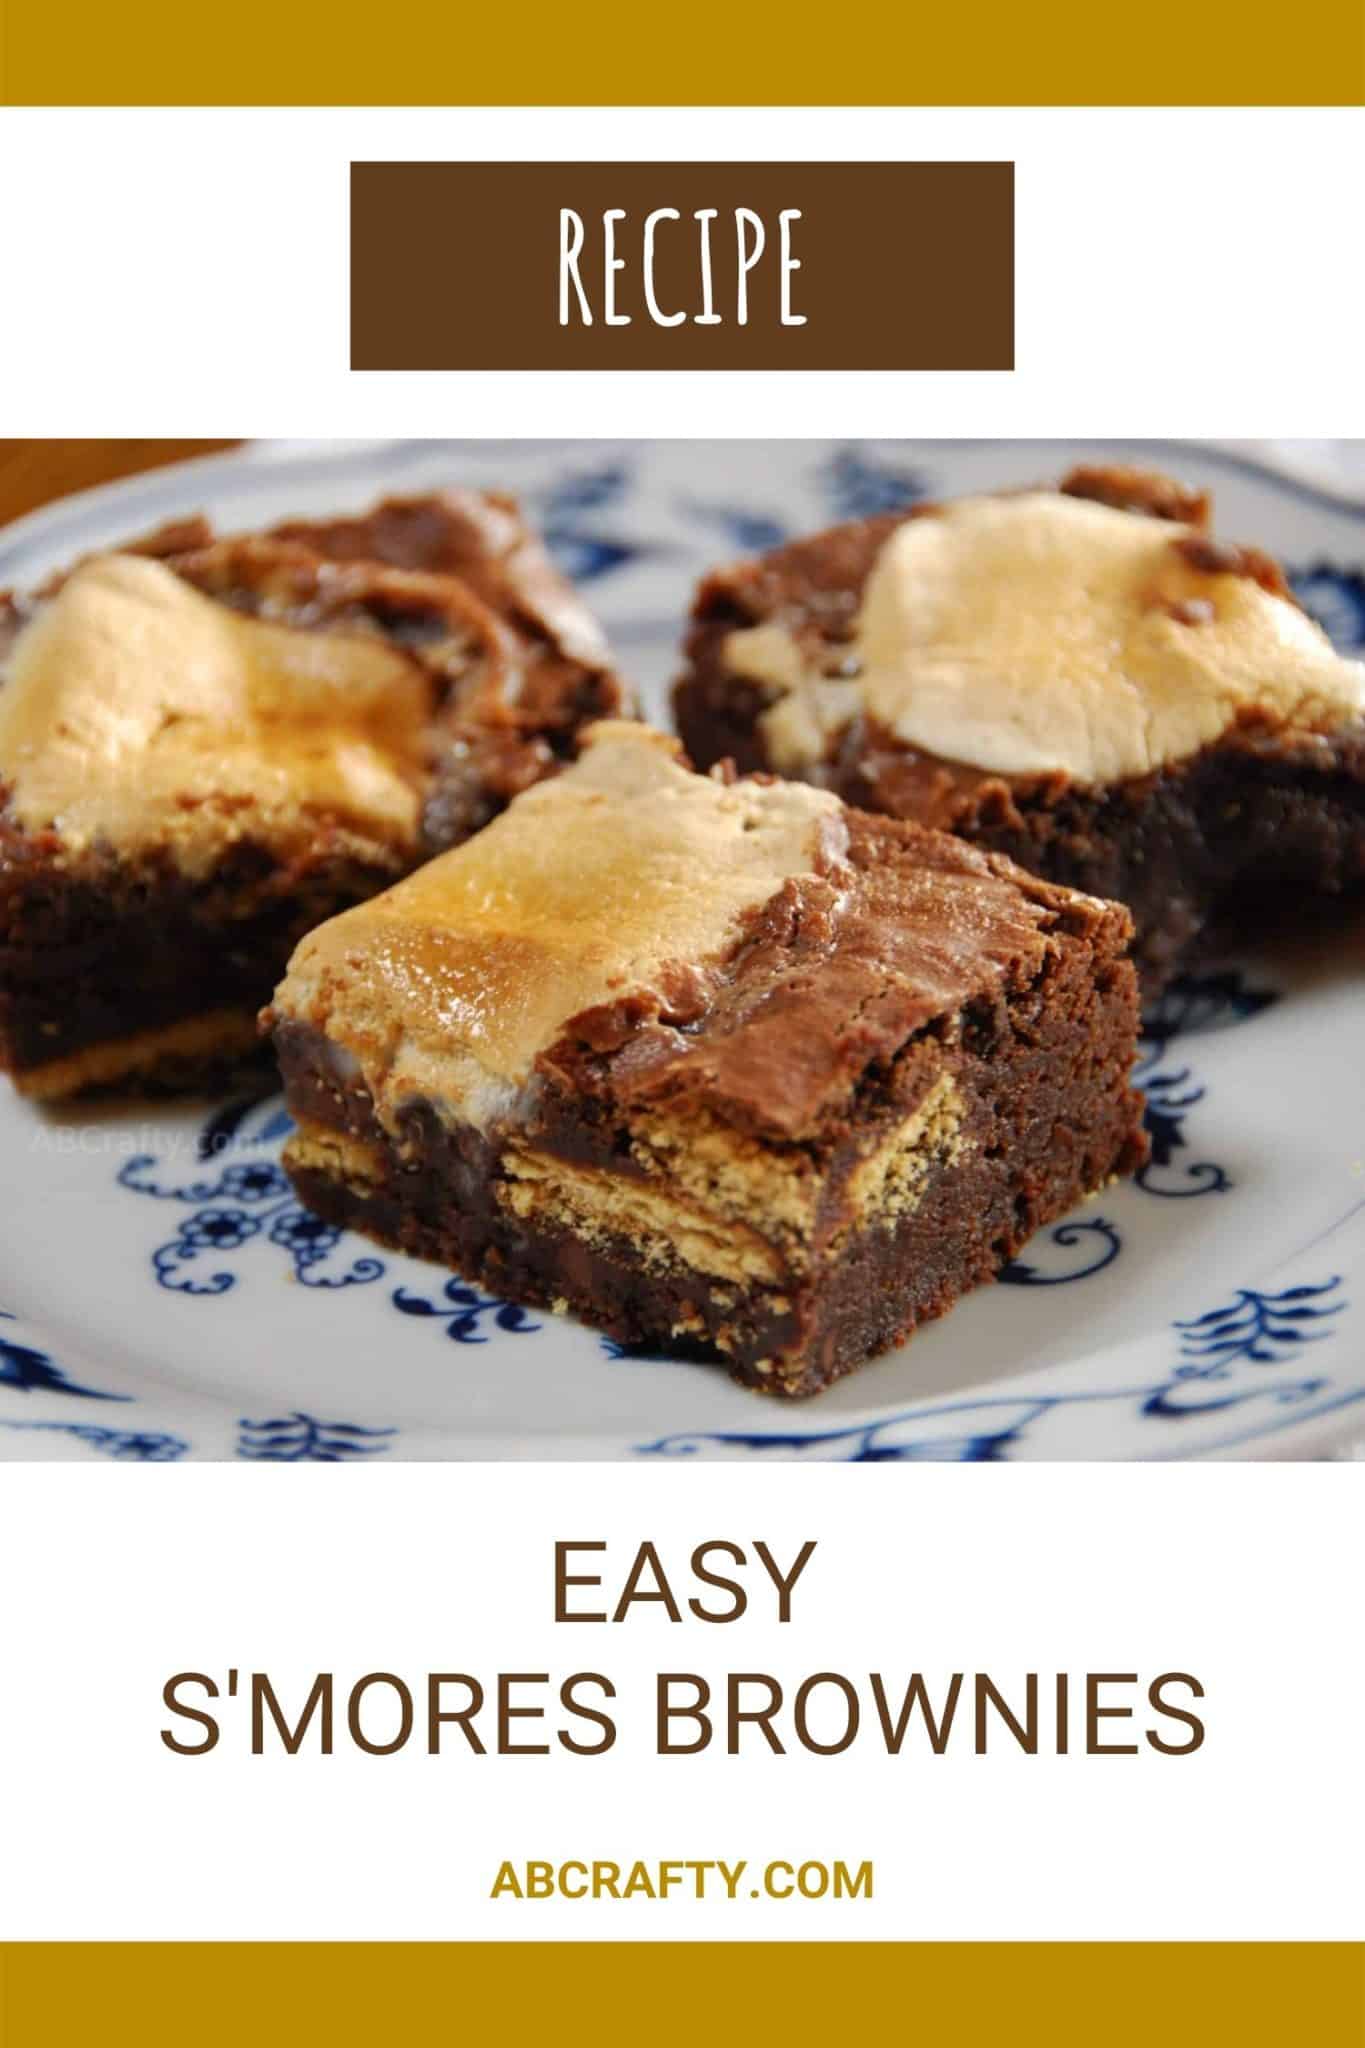 photo of 3 smores brownies on a plate with the title "recipe - easy "s'mores brownies"